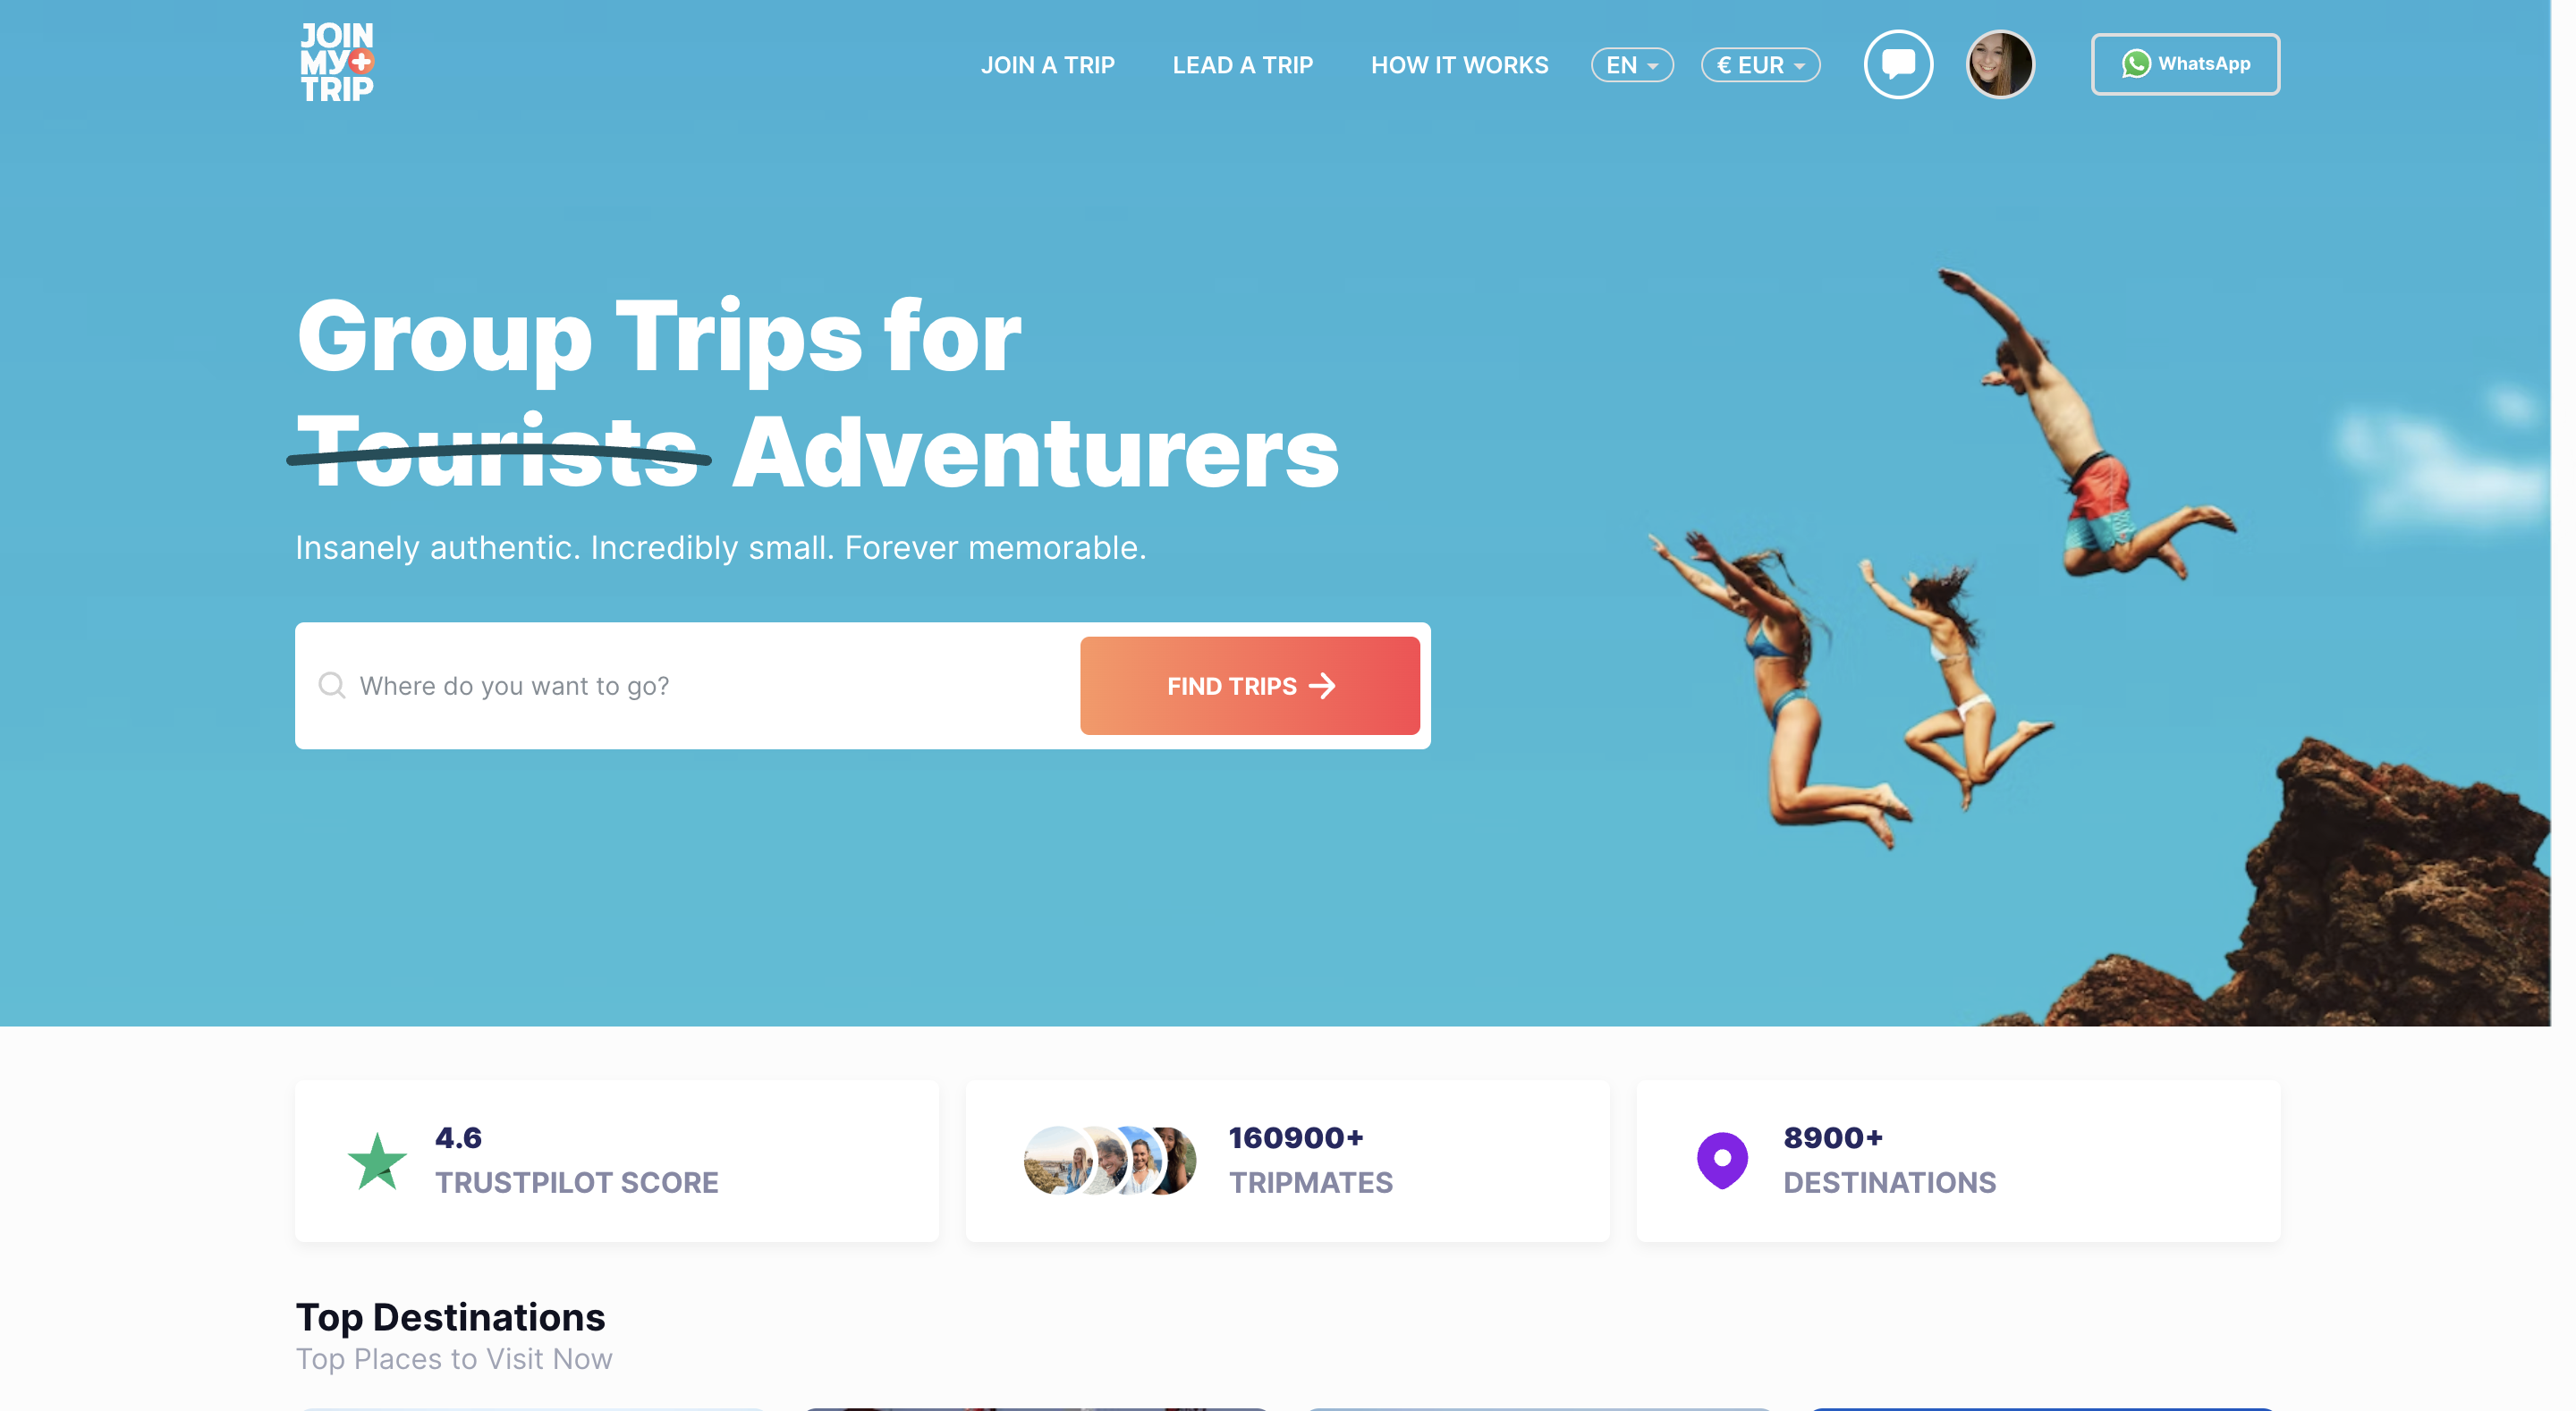 One of the best group travel companies out there: JoinMyTrip